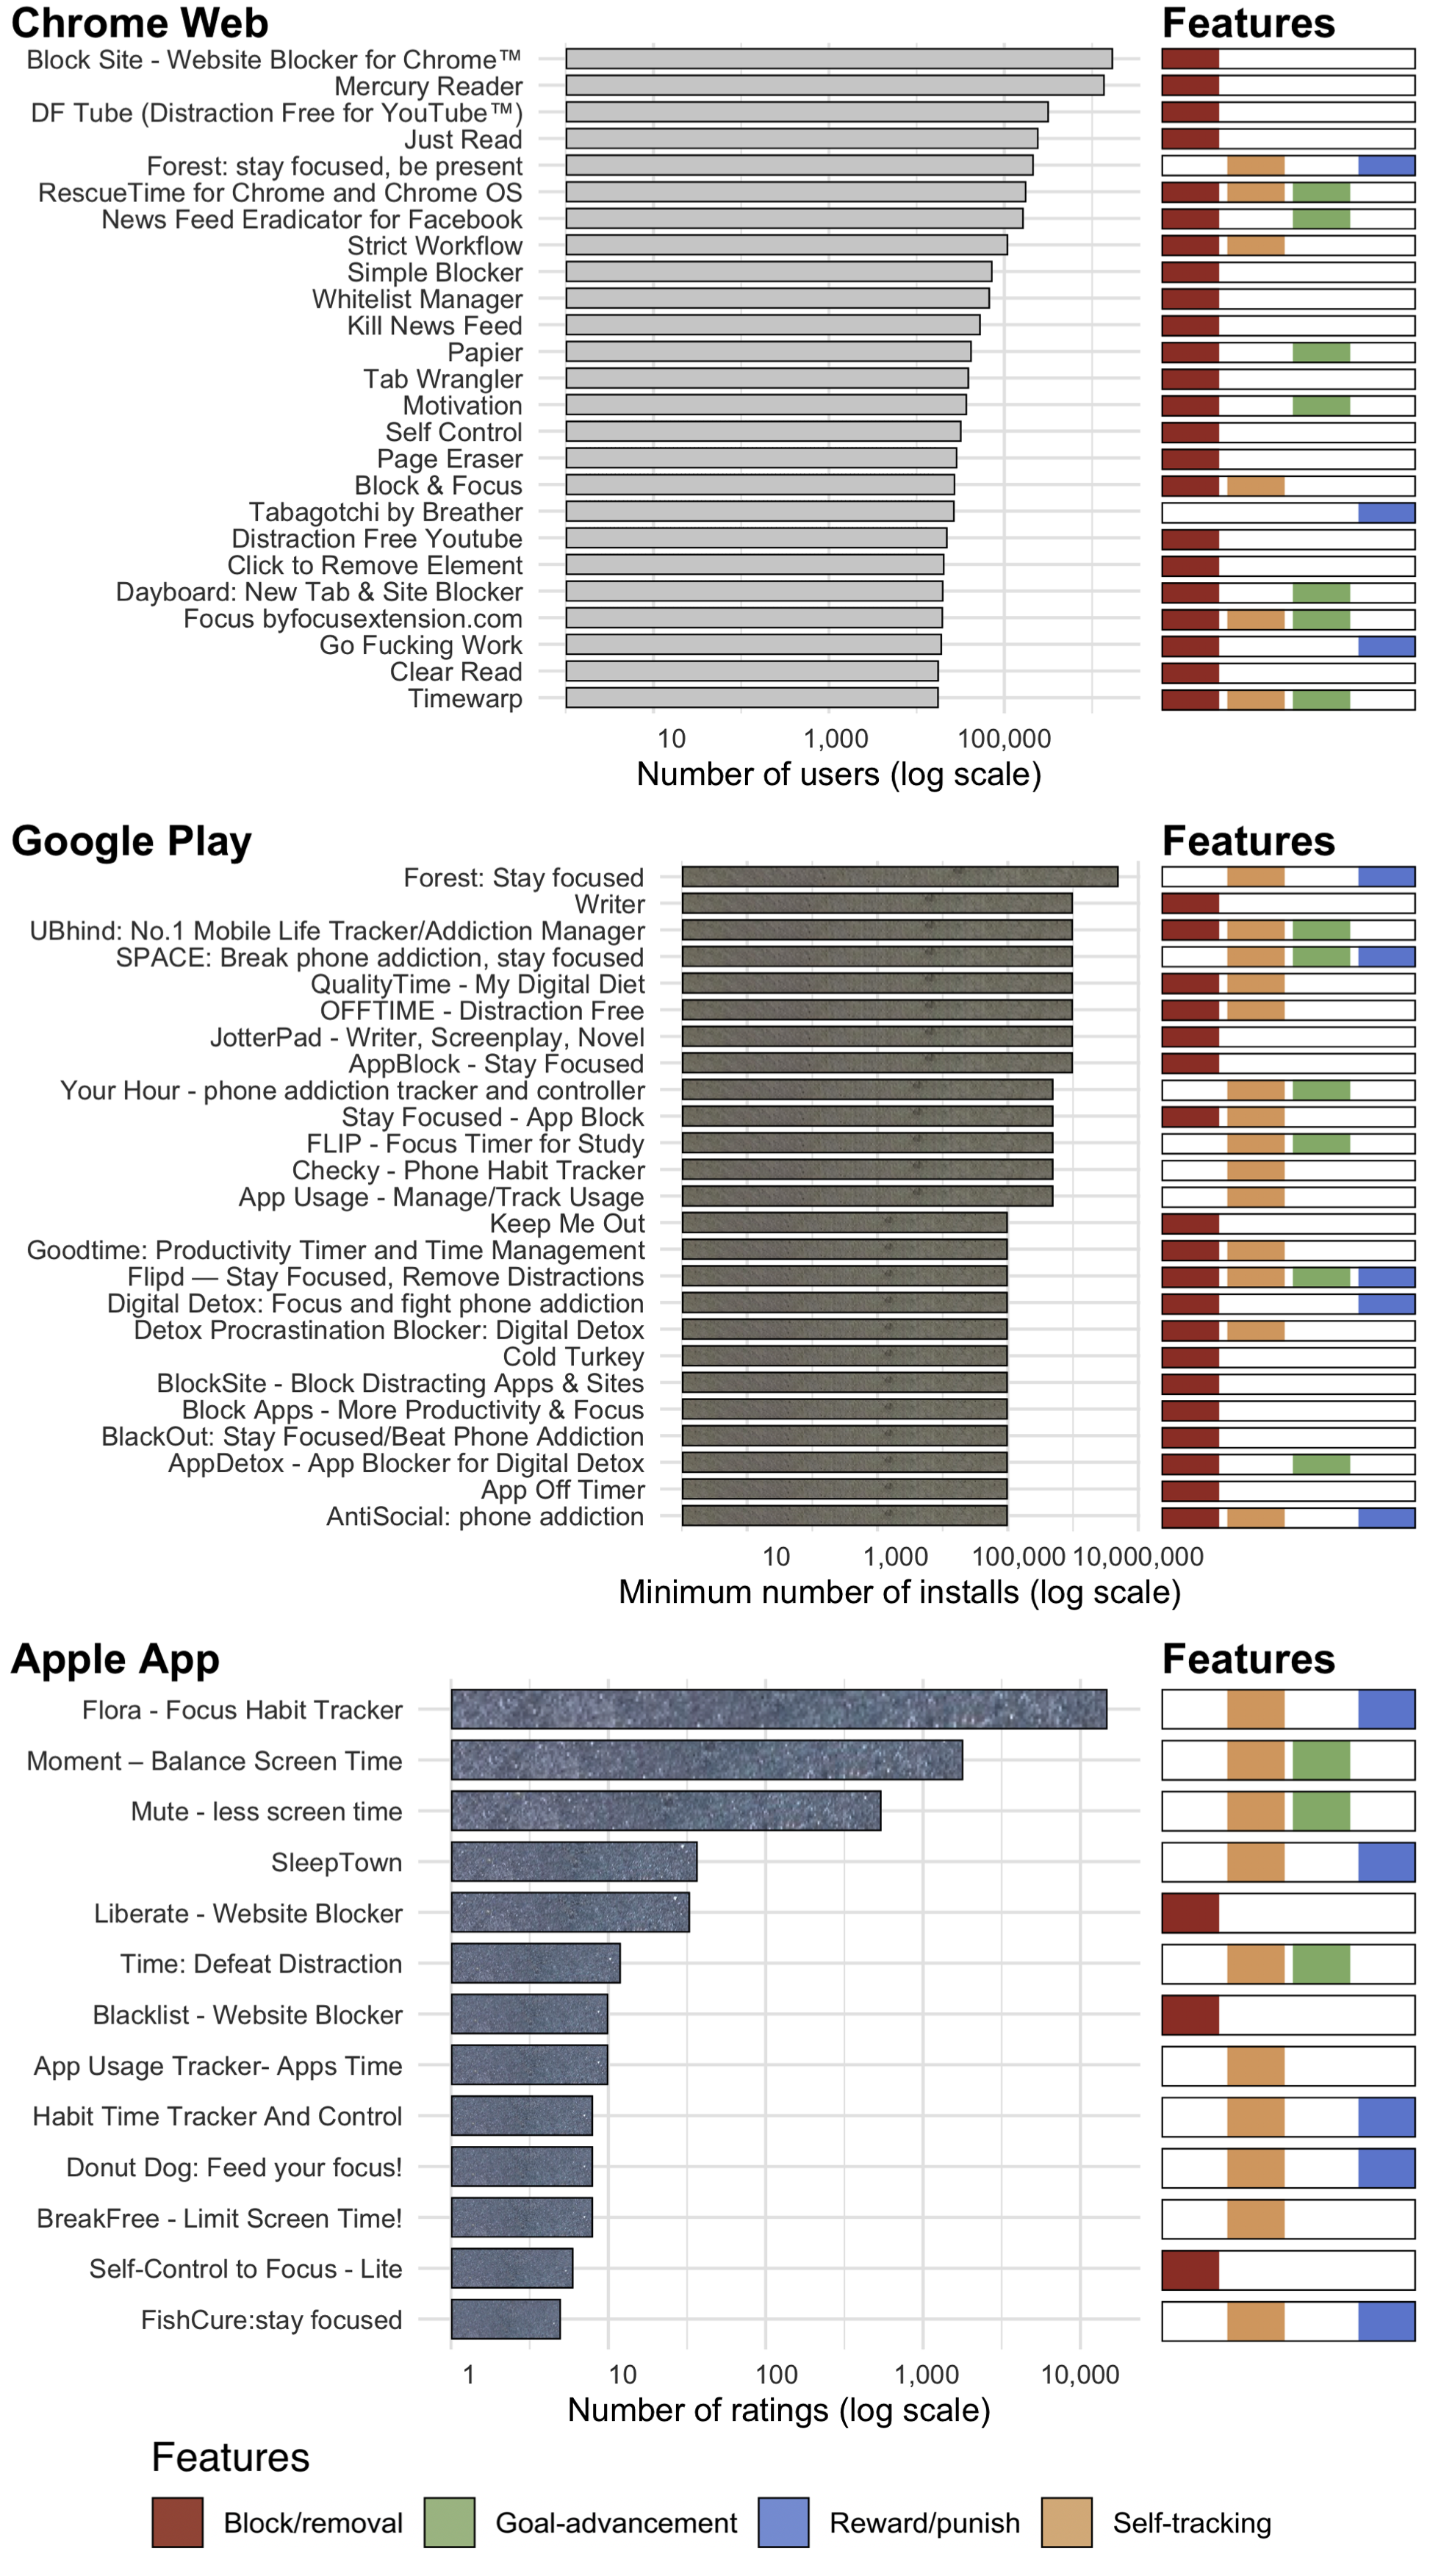 Top tools in terms of number of users (on Apple App store, ranked by number of ratings as this store provides no direct information about user numbers). Reward/punishment is the least common type of design feature among top tools, but two tools including such functionality (Forest and Flora, which gamify self-control by growing virtual trees) have the highest user numbers on Google Play and Apple App, and rank in top 5 on the Chrome Web store. Block/removal features are very common on Google Play and Chrome Web, but rare on the Apple App store.